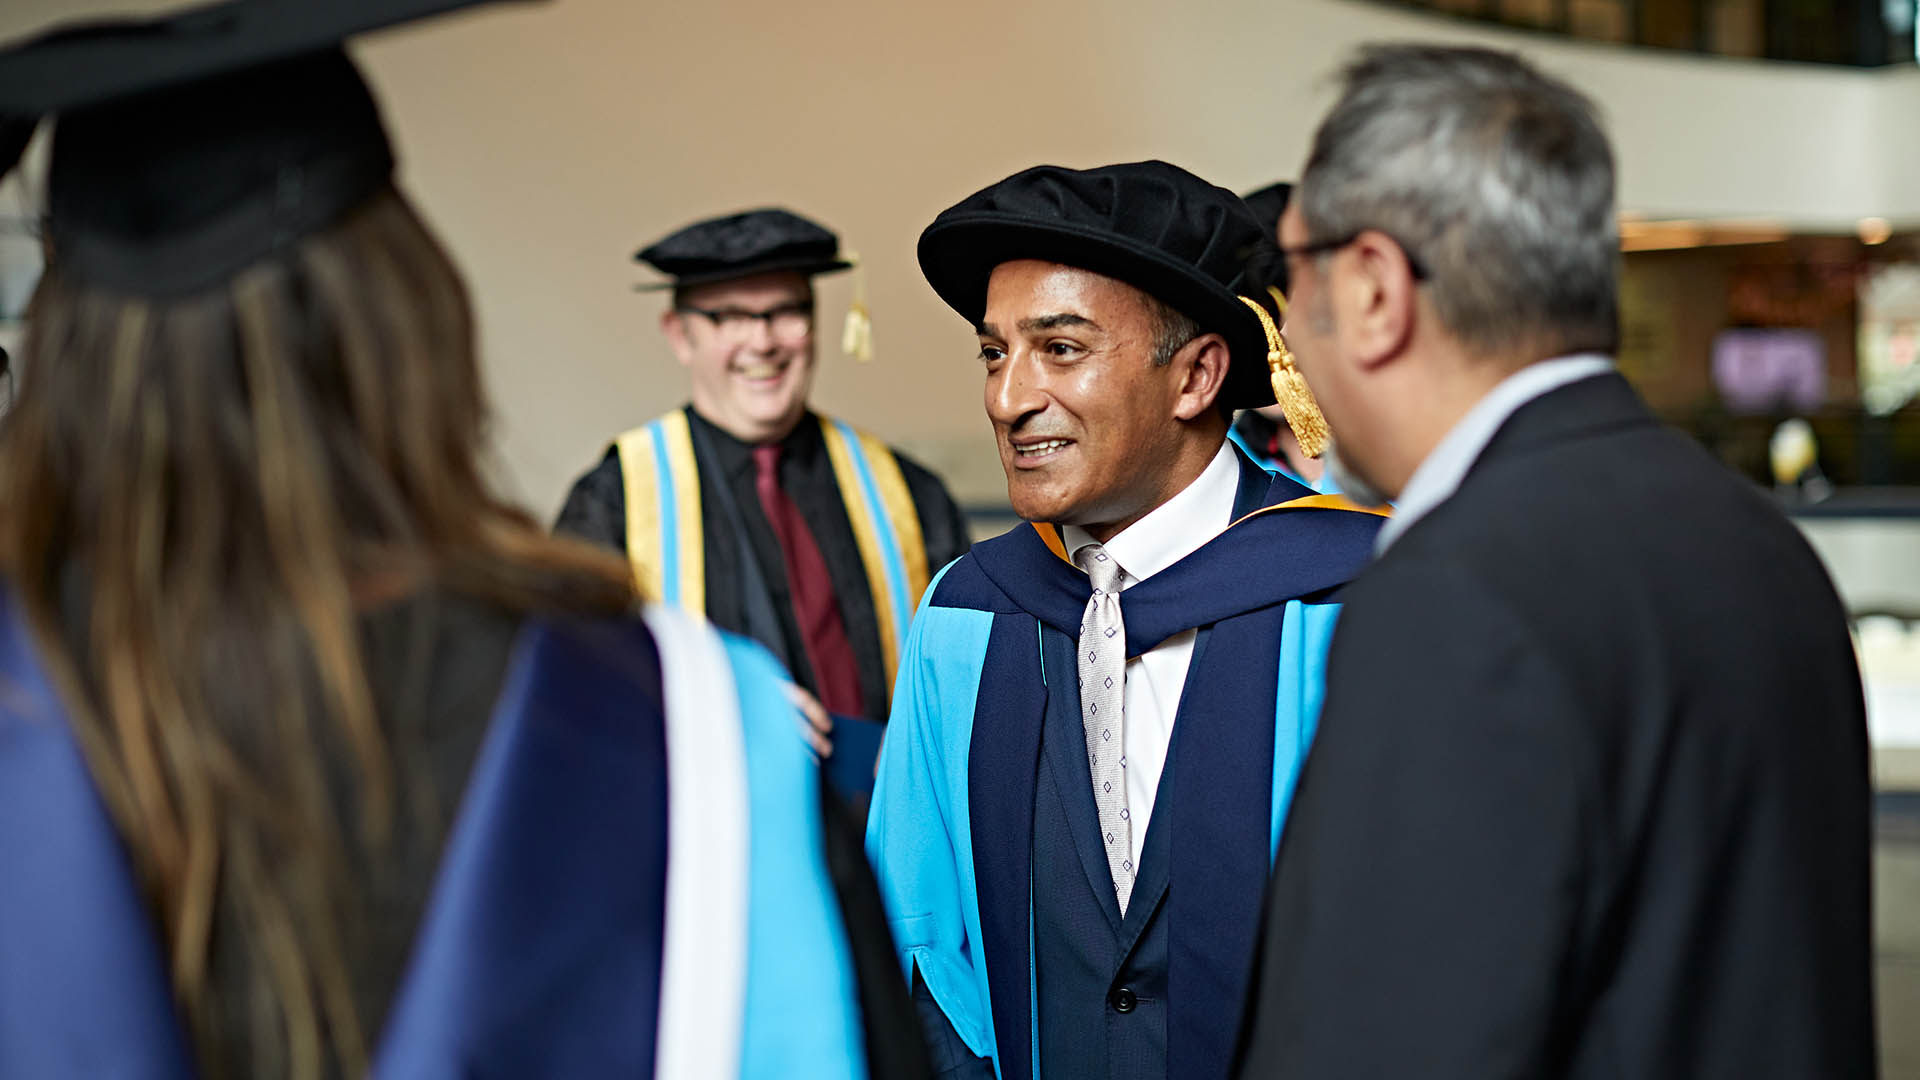 Adil Ray speaks to people after his honorary doctorate